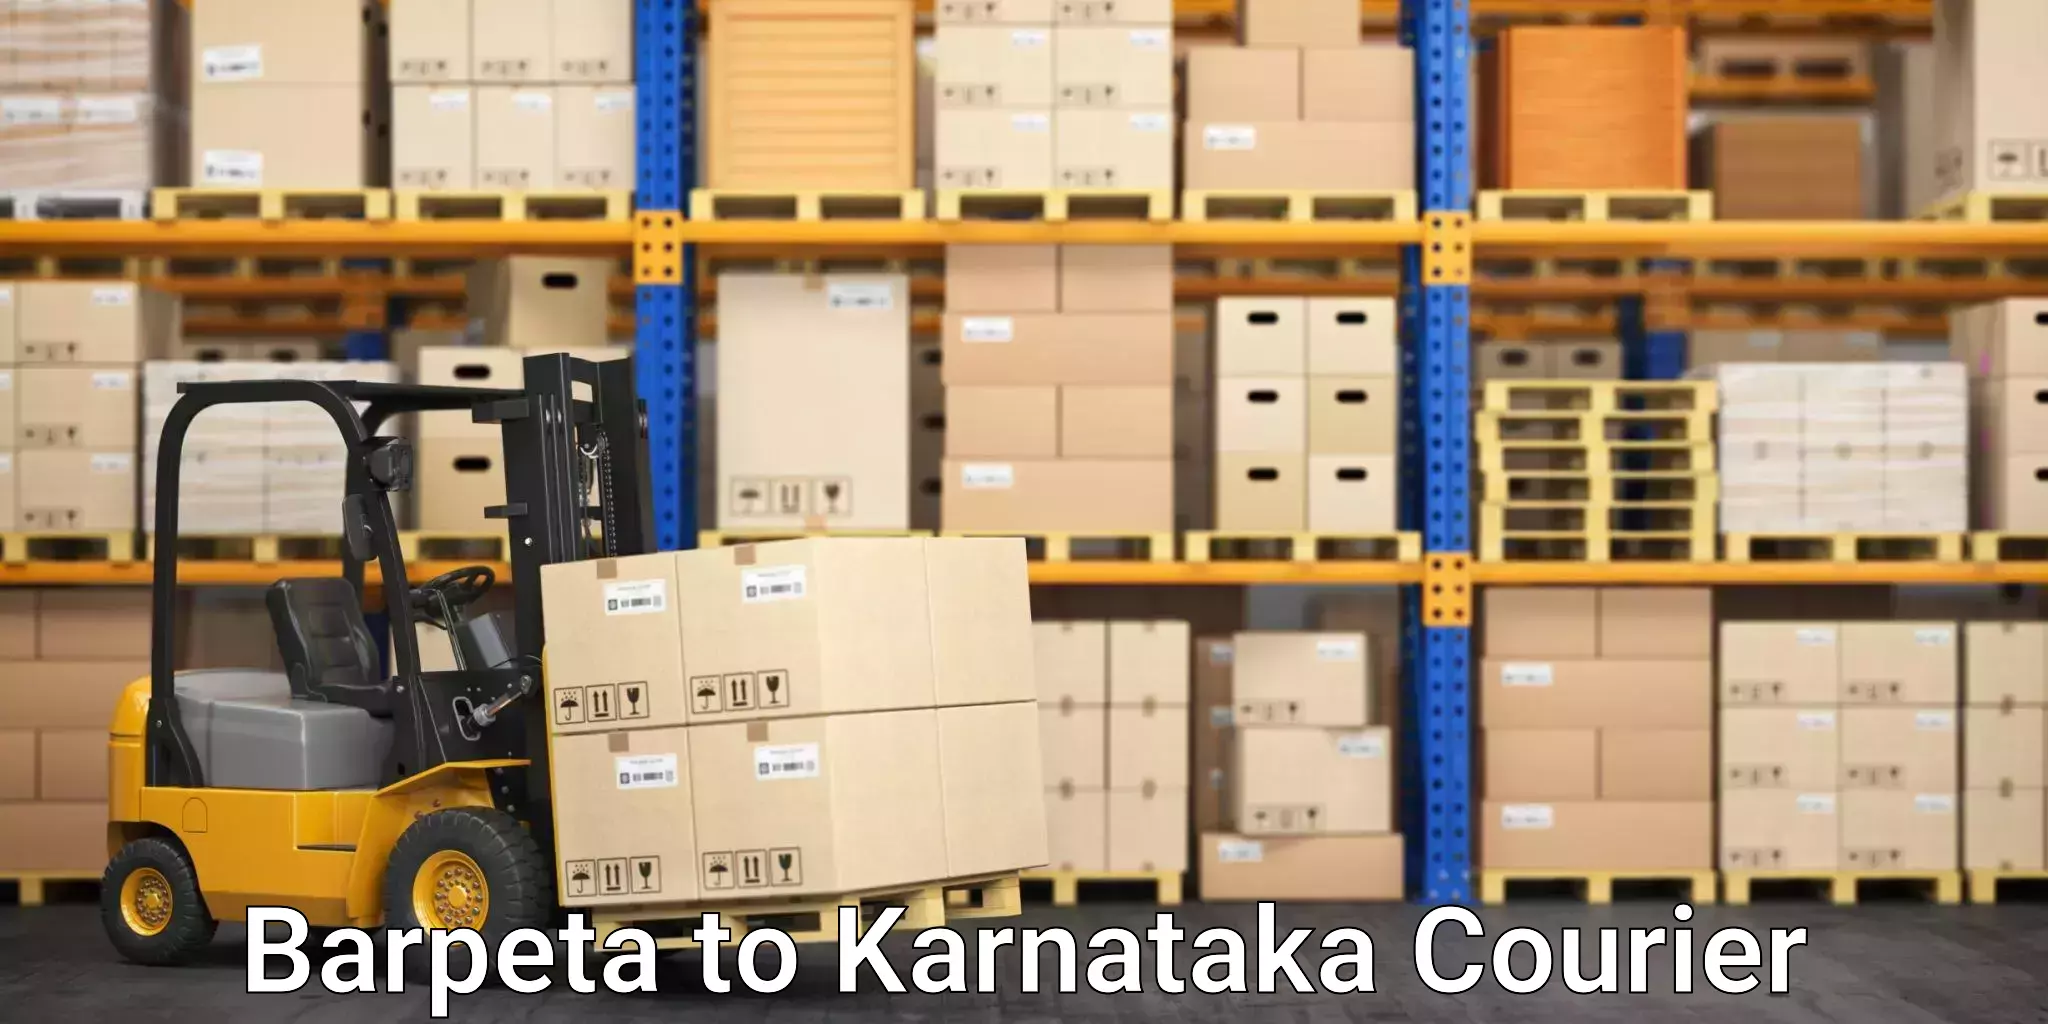 State-of-the-art courier technology in Barpeta to Karnataka